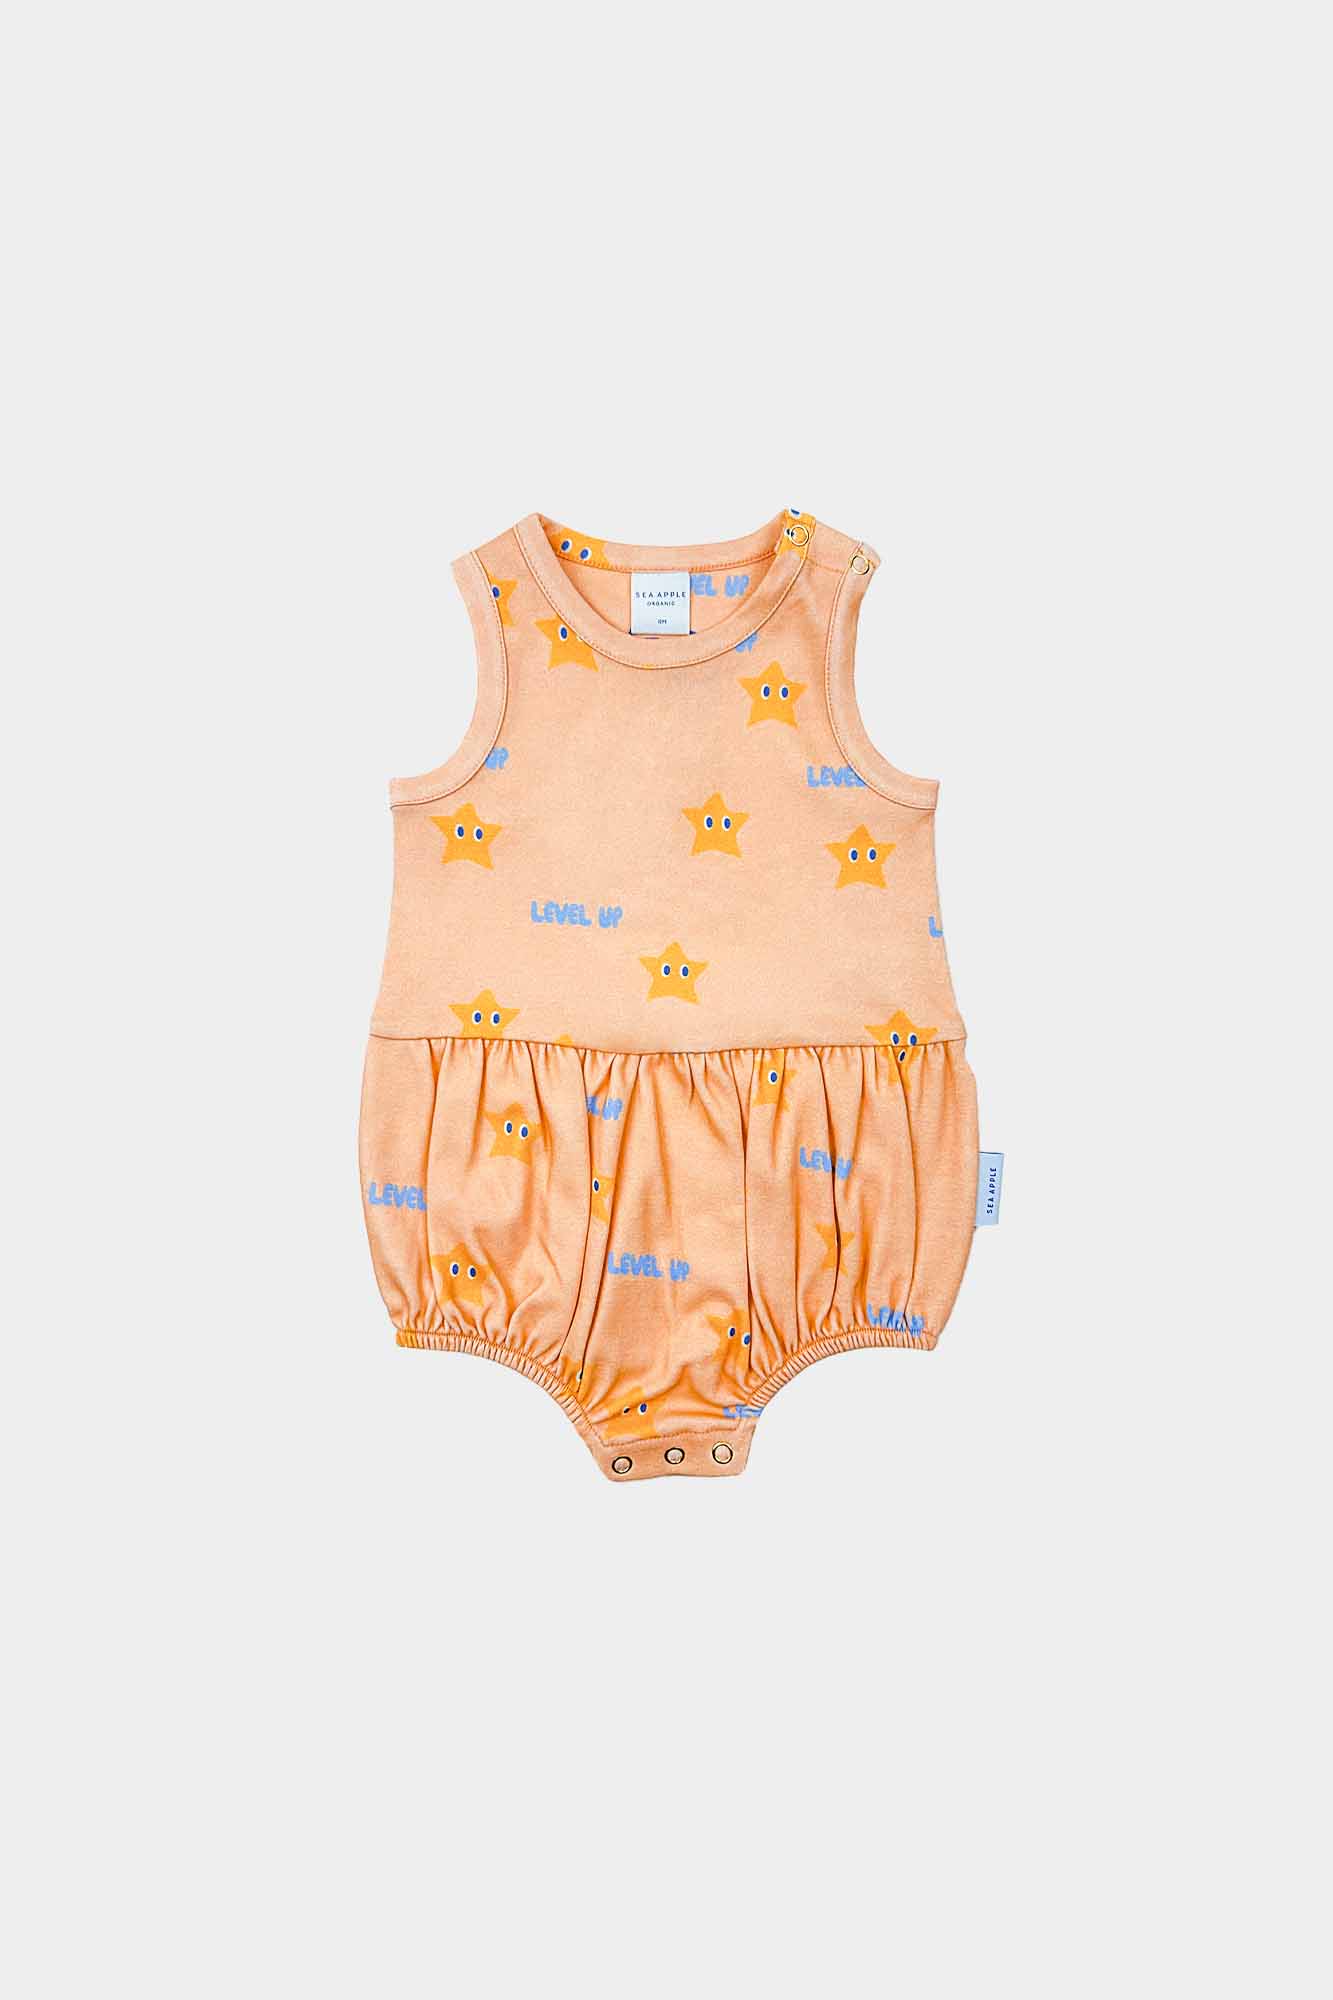 Level up Bloomers Playsuit